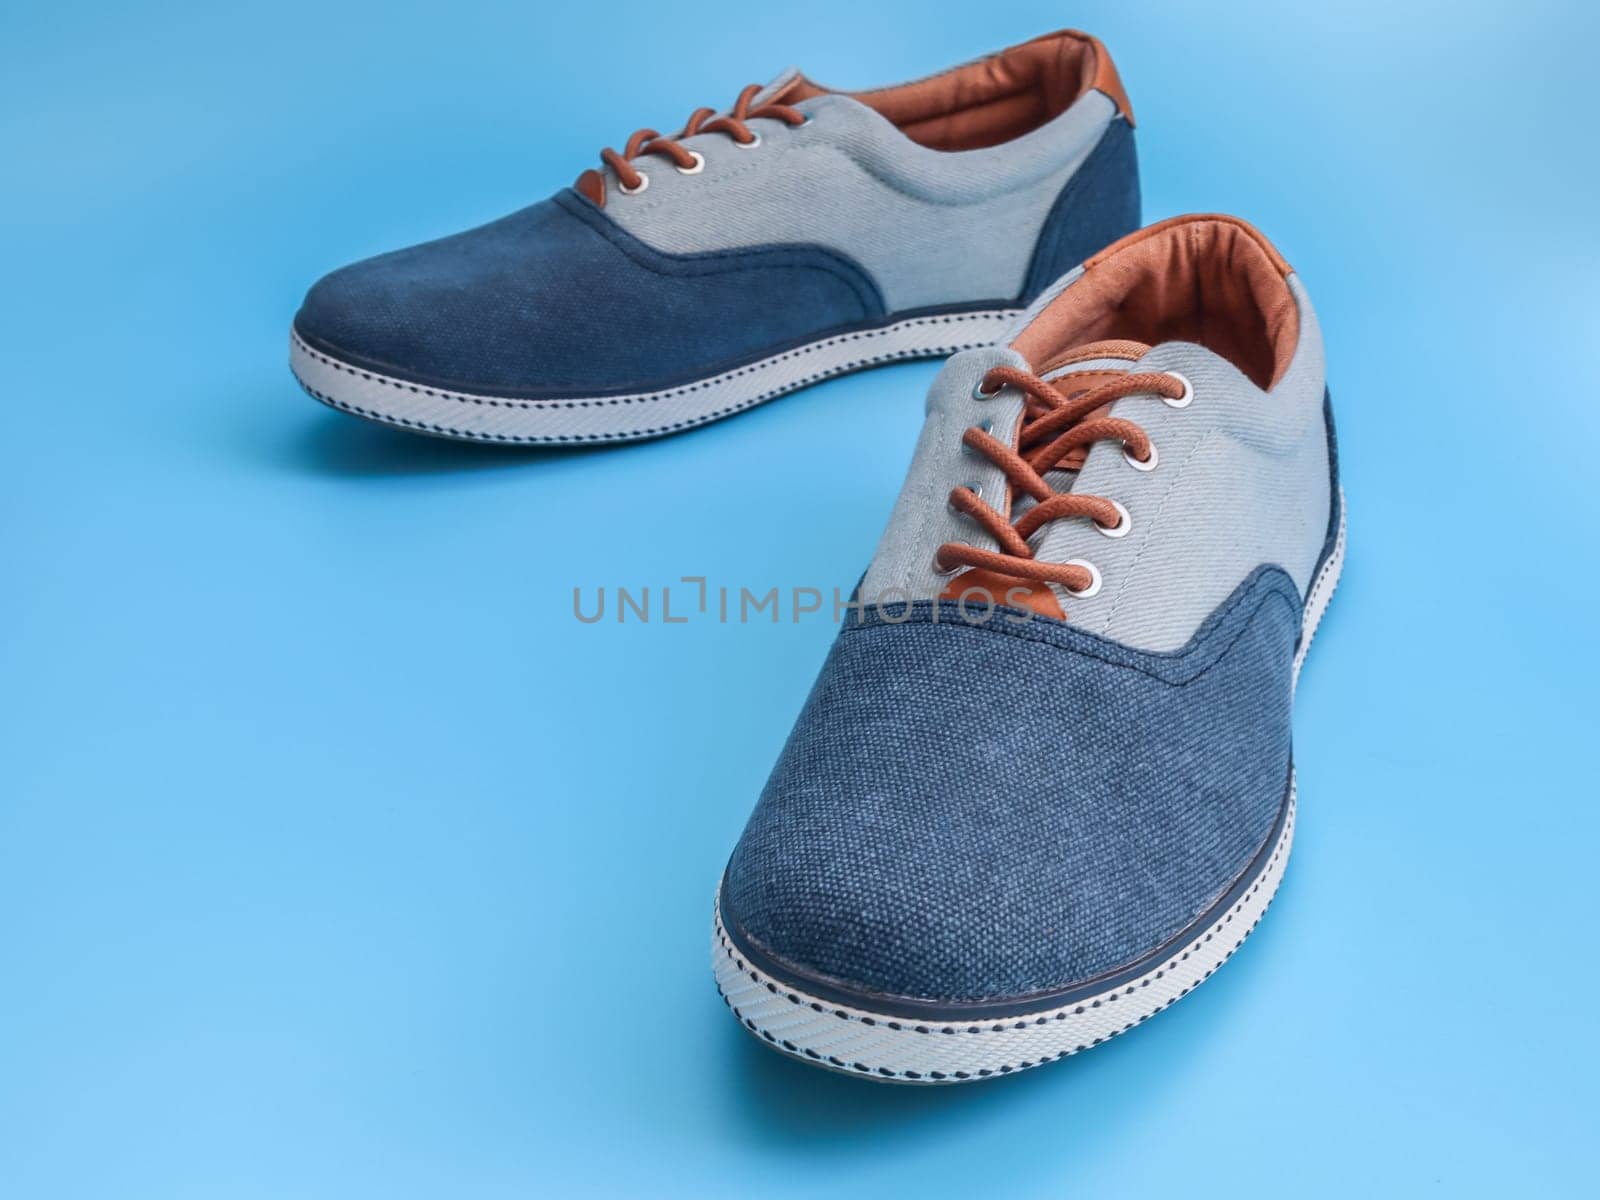 Denim male sneakers on a blue background. by Nataliya